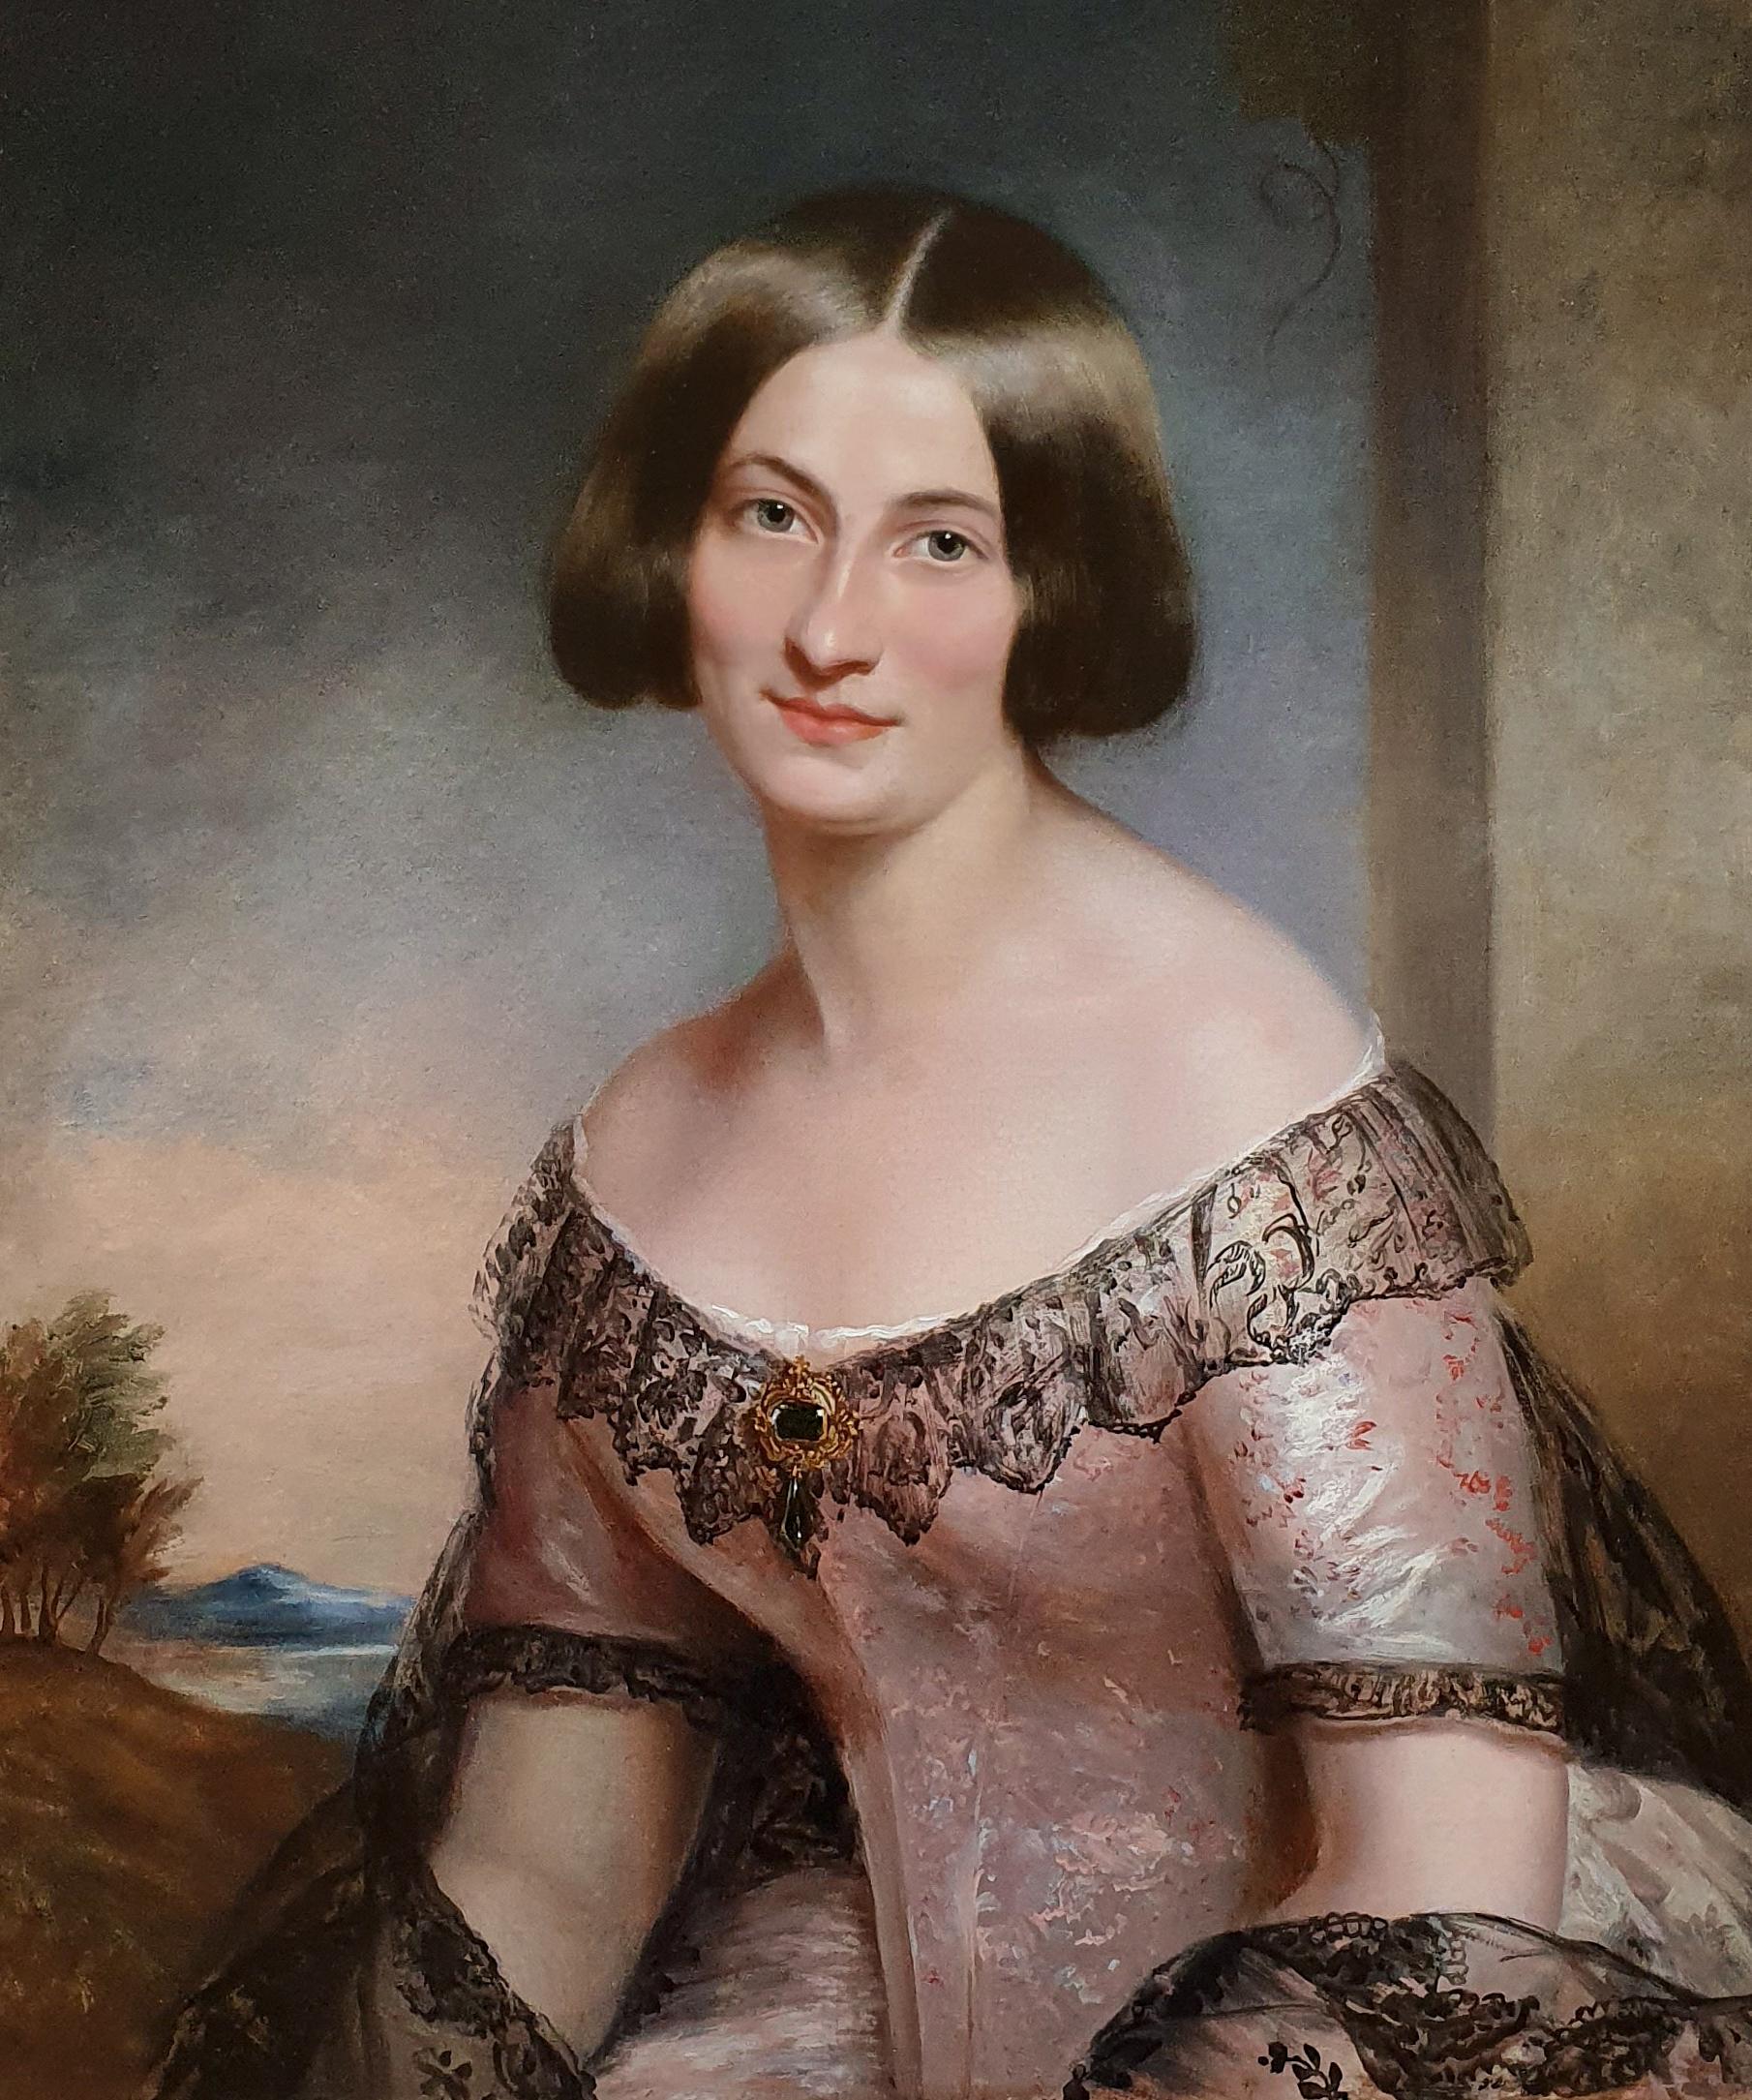 Portrait of a Lady in Pink Dress c.1850, Antique Oil Painting